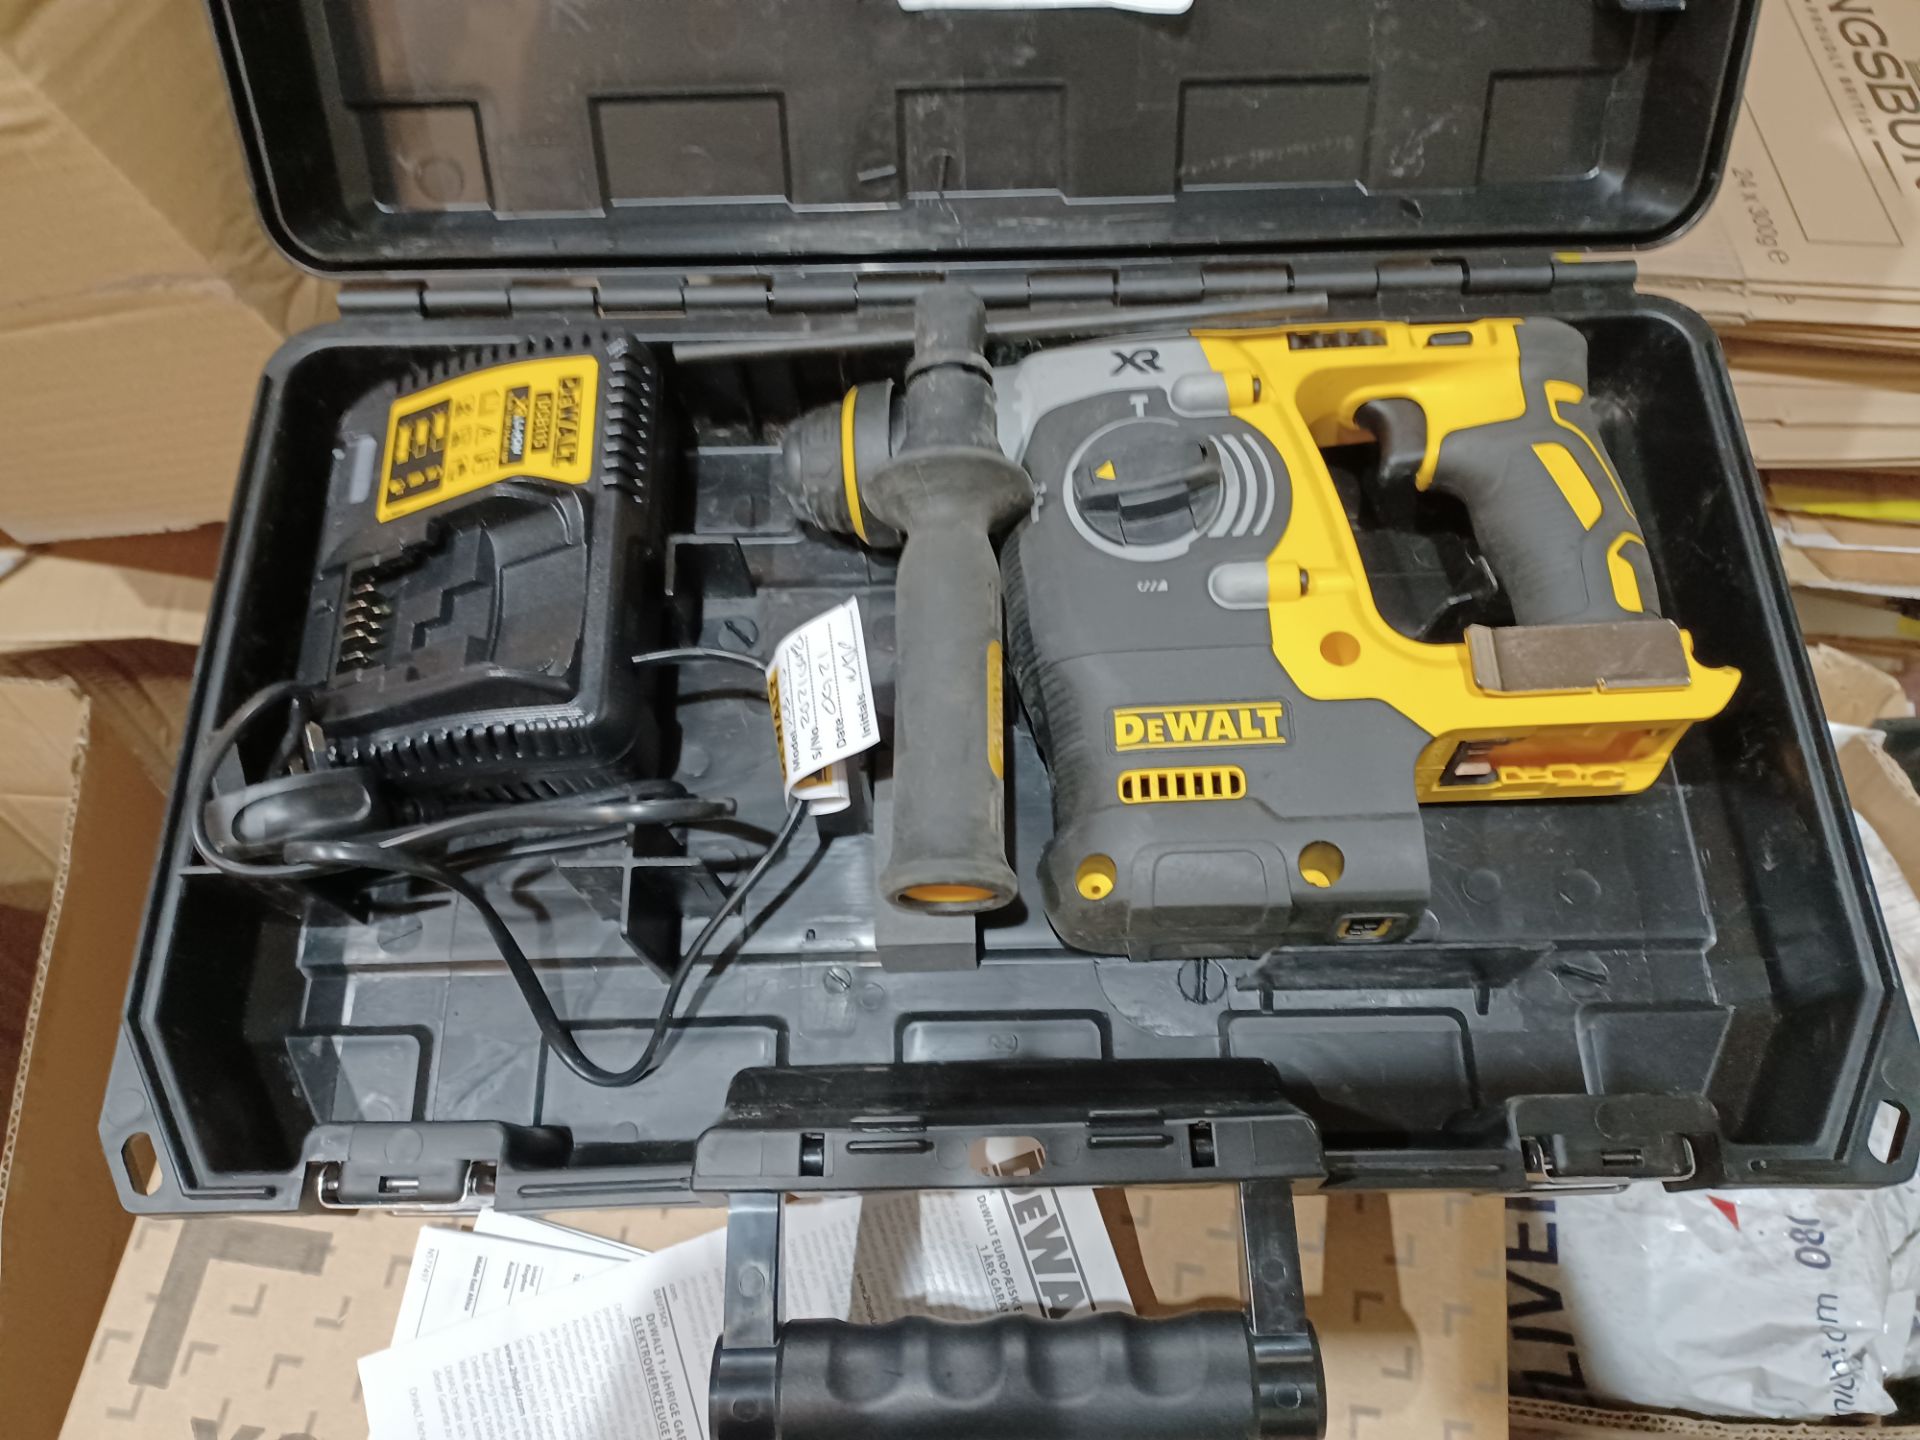 DEWALT DCH273P2-GB 3.1KG 18V 5.0AH LI-ION XR BRUSHLESS CORDLESS SDS PLUS DRILL COMES WITH CHARGER